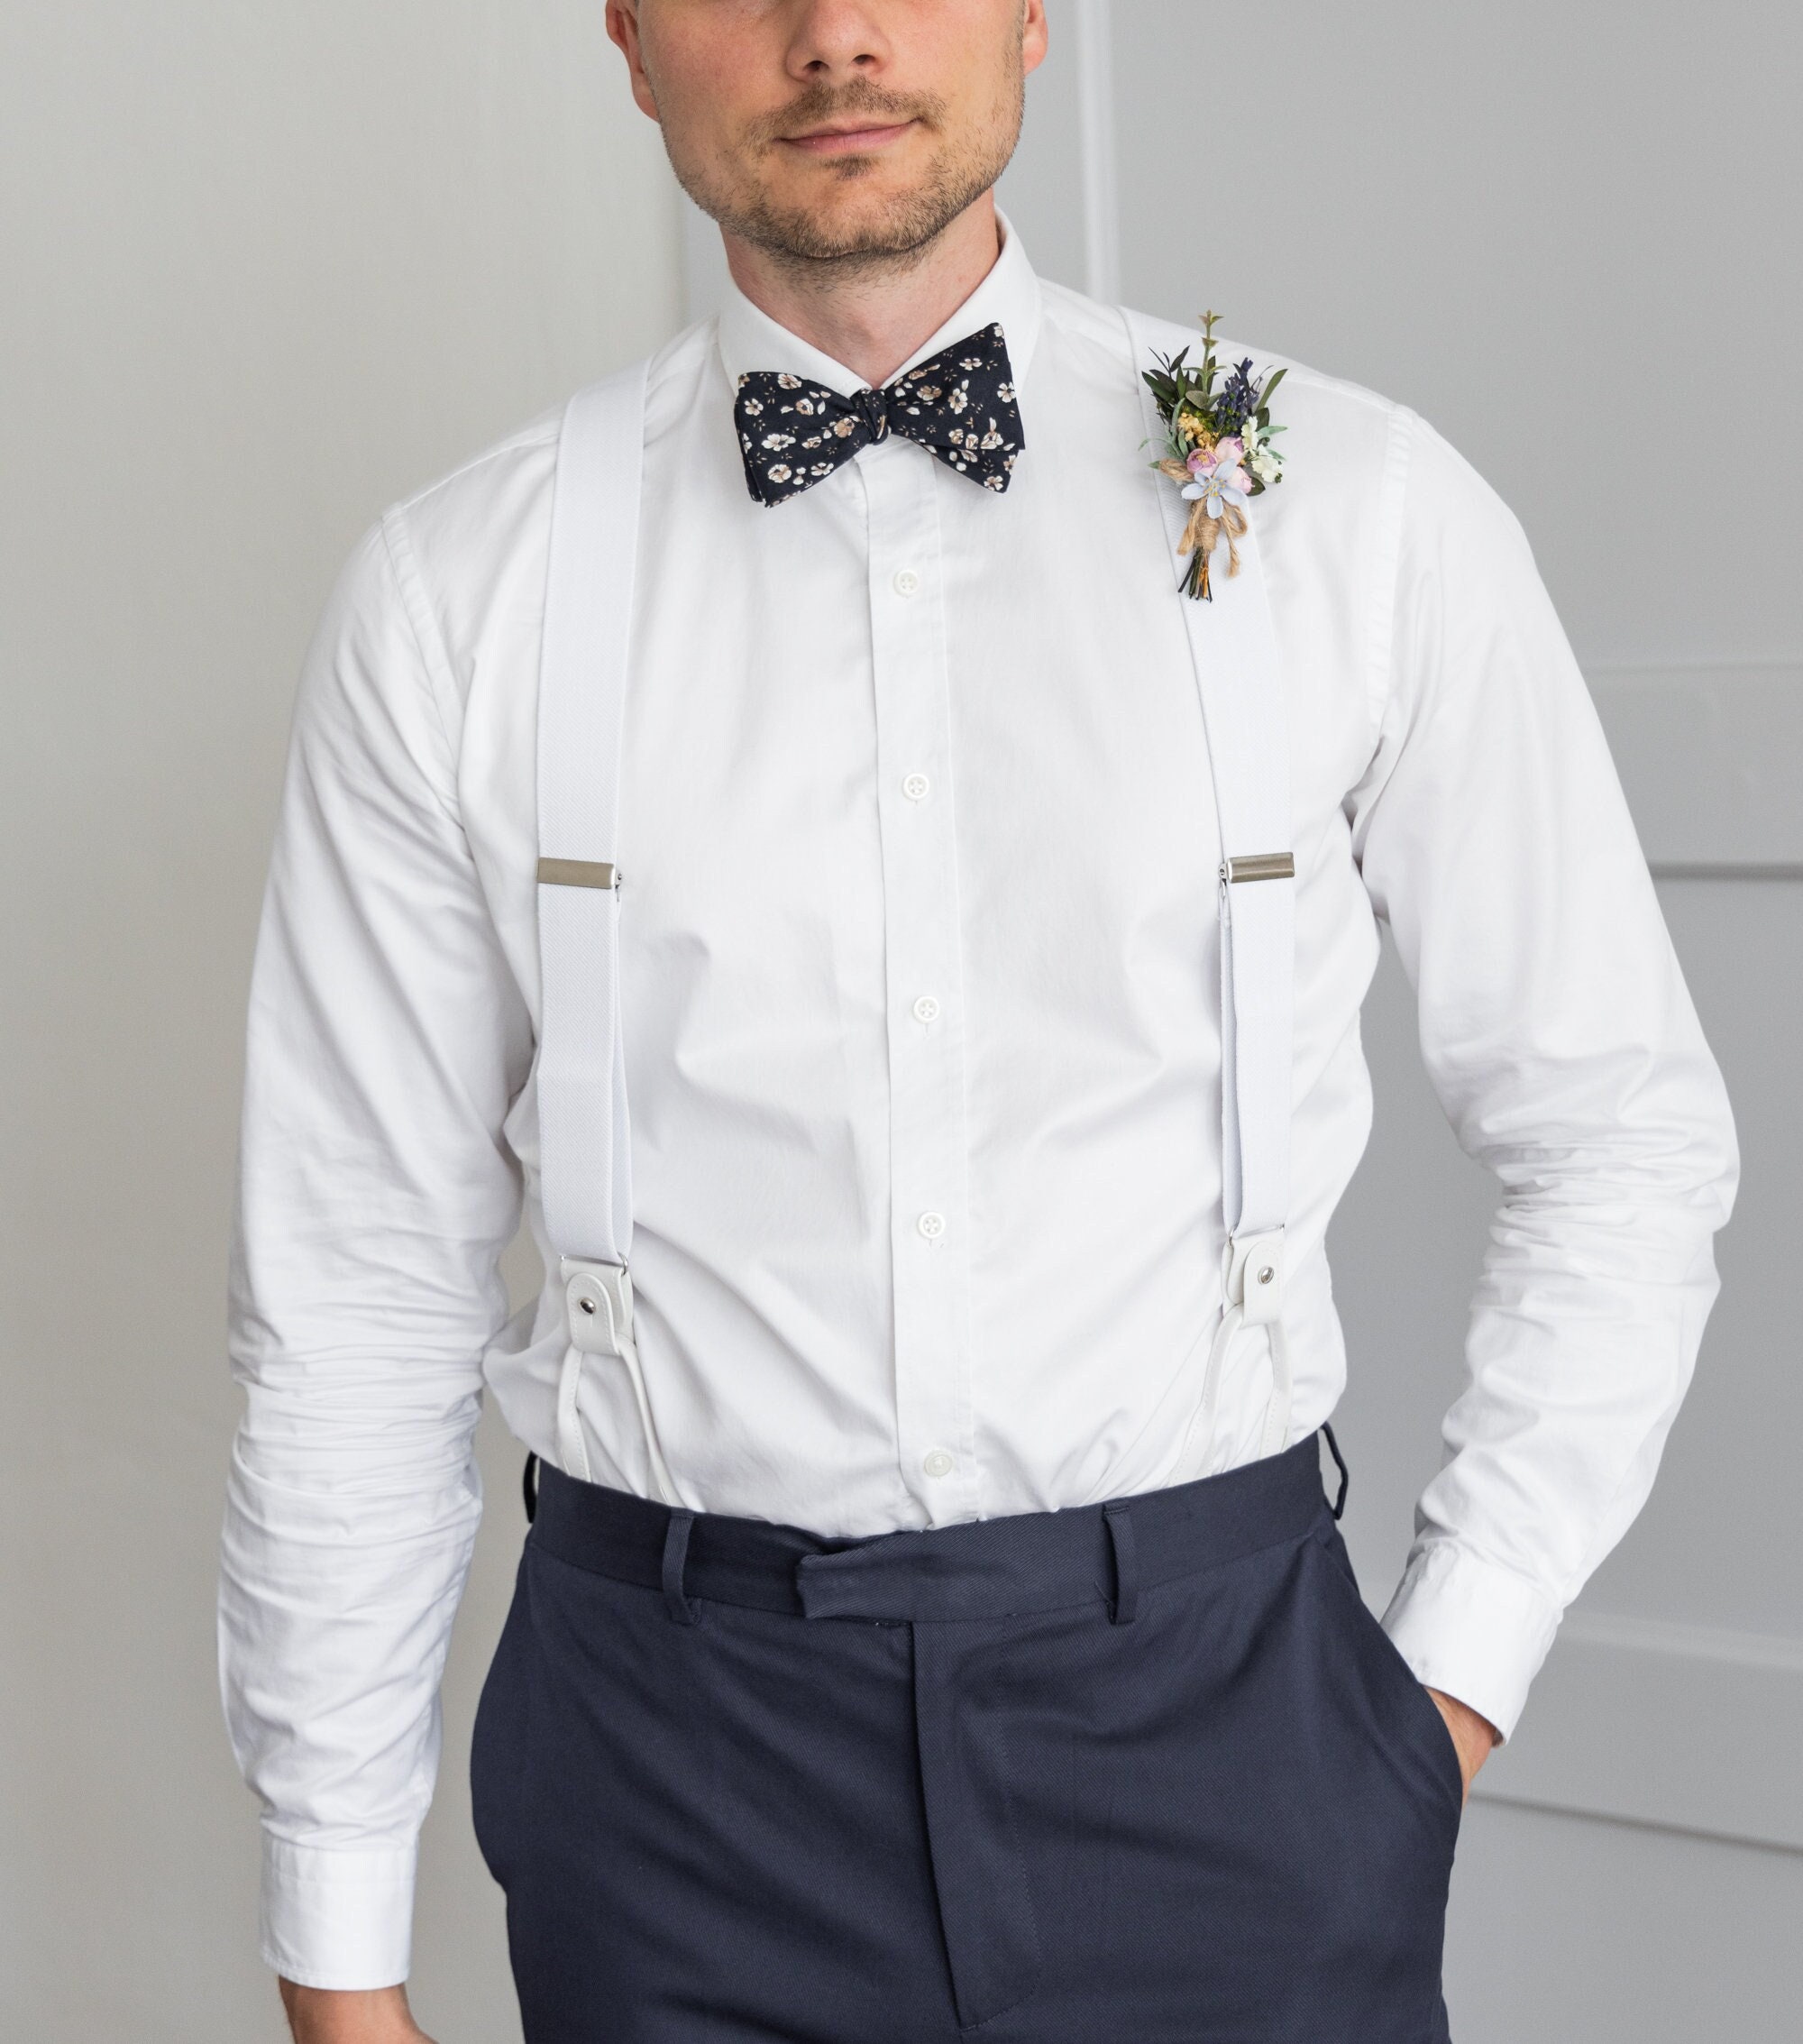 Buy White Suspenders for Men, Button and Clip Suspenders for Groom  Groomsmen, Tuxedo Wedding Suspenders Online in India 